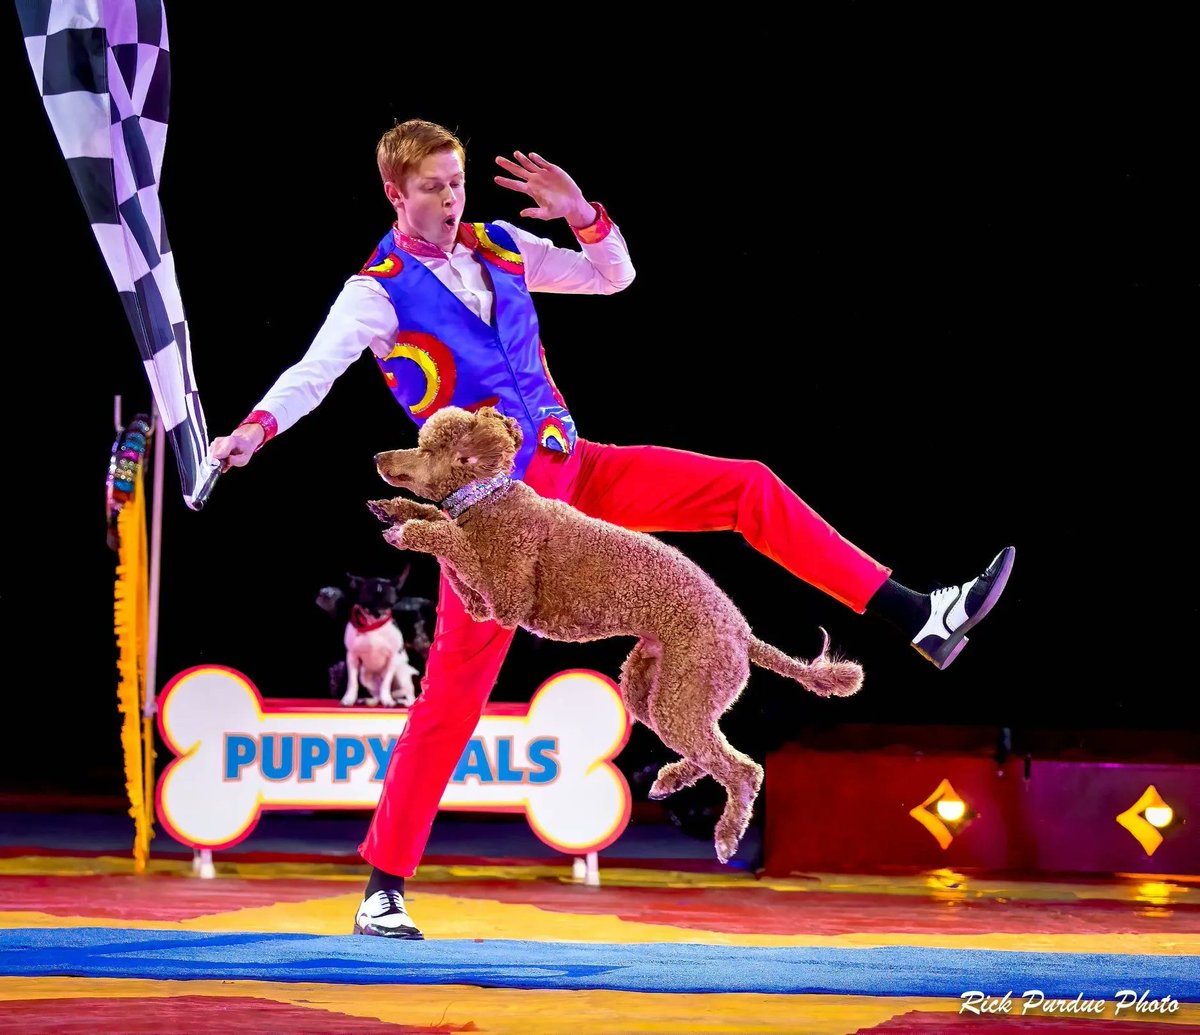 Puppy Pals, known for thier appearance on America's Got Talent, are coming to bring you an unforgettable afternoon on April 15th at 2PM as they lead the pooches through challenging and comical tricks that will surely leave you astonished! Tickets at bit.ly/pals23-ft